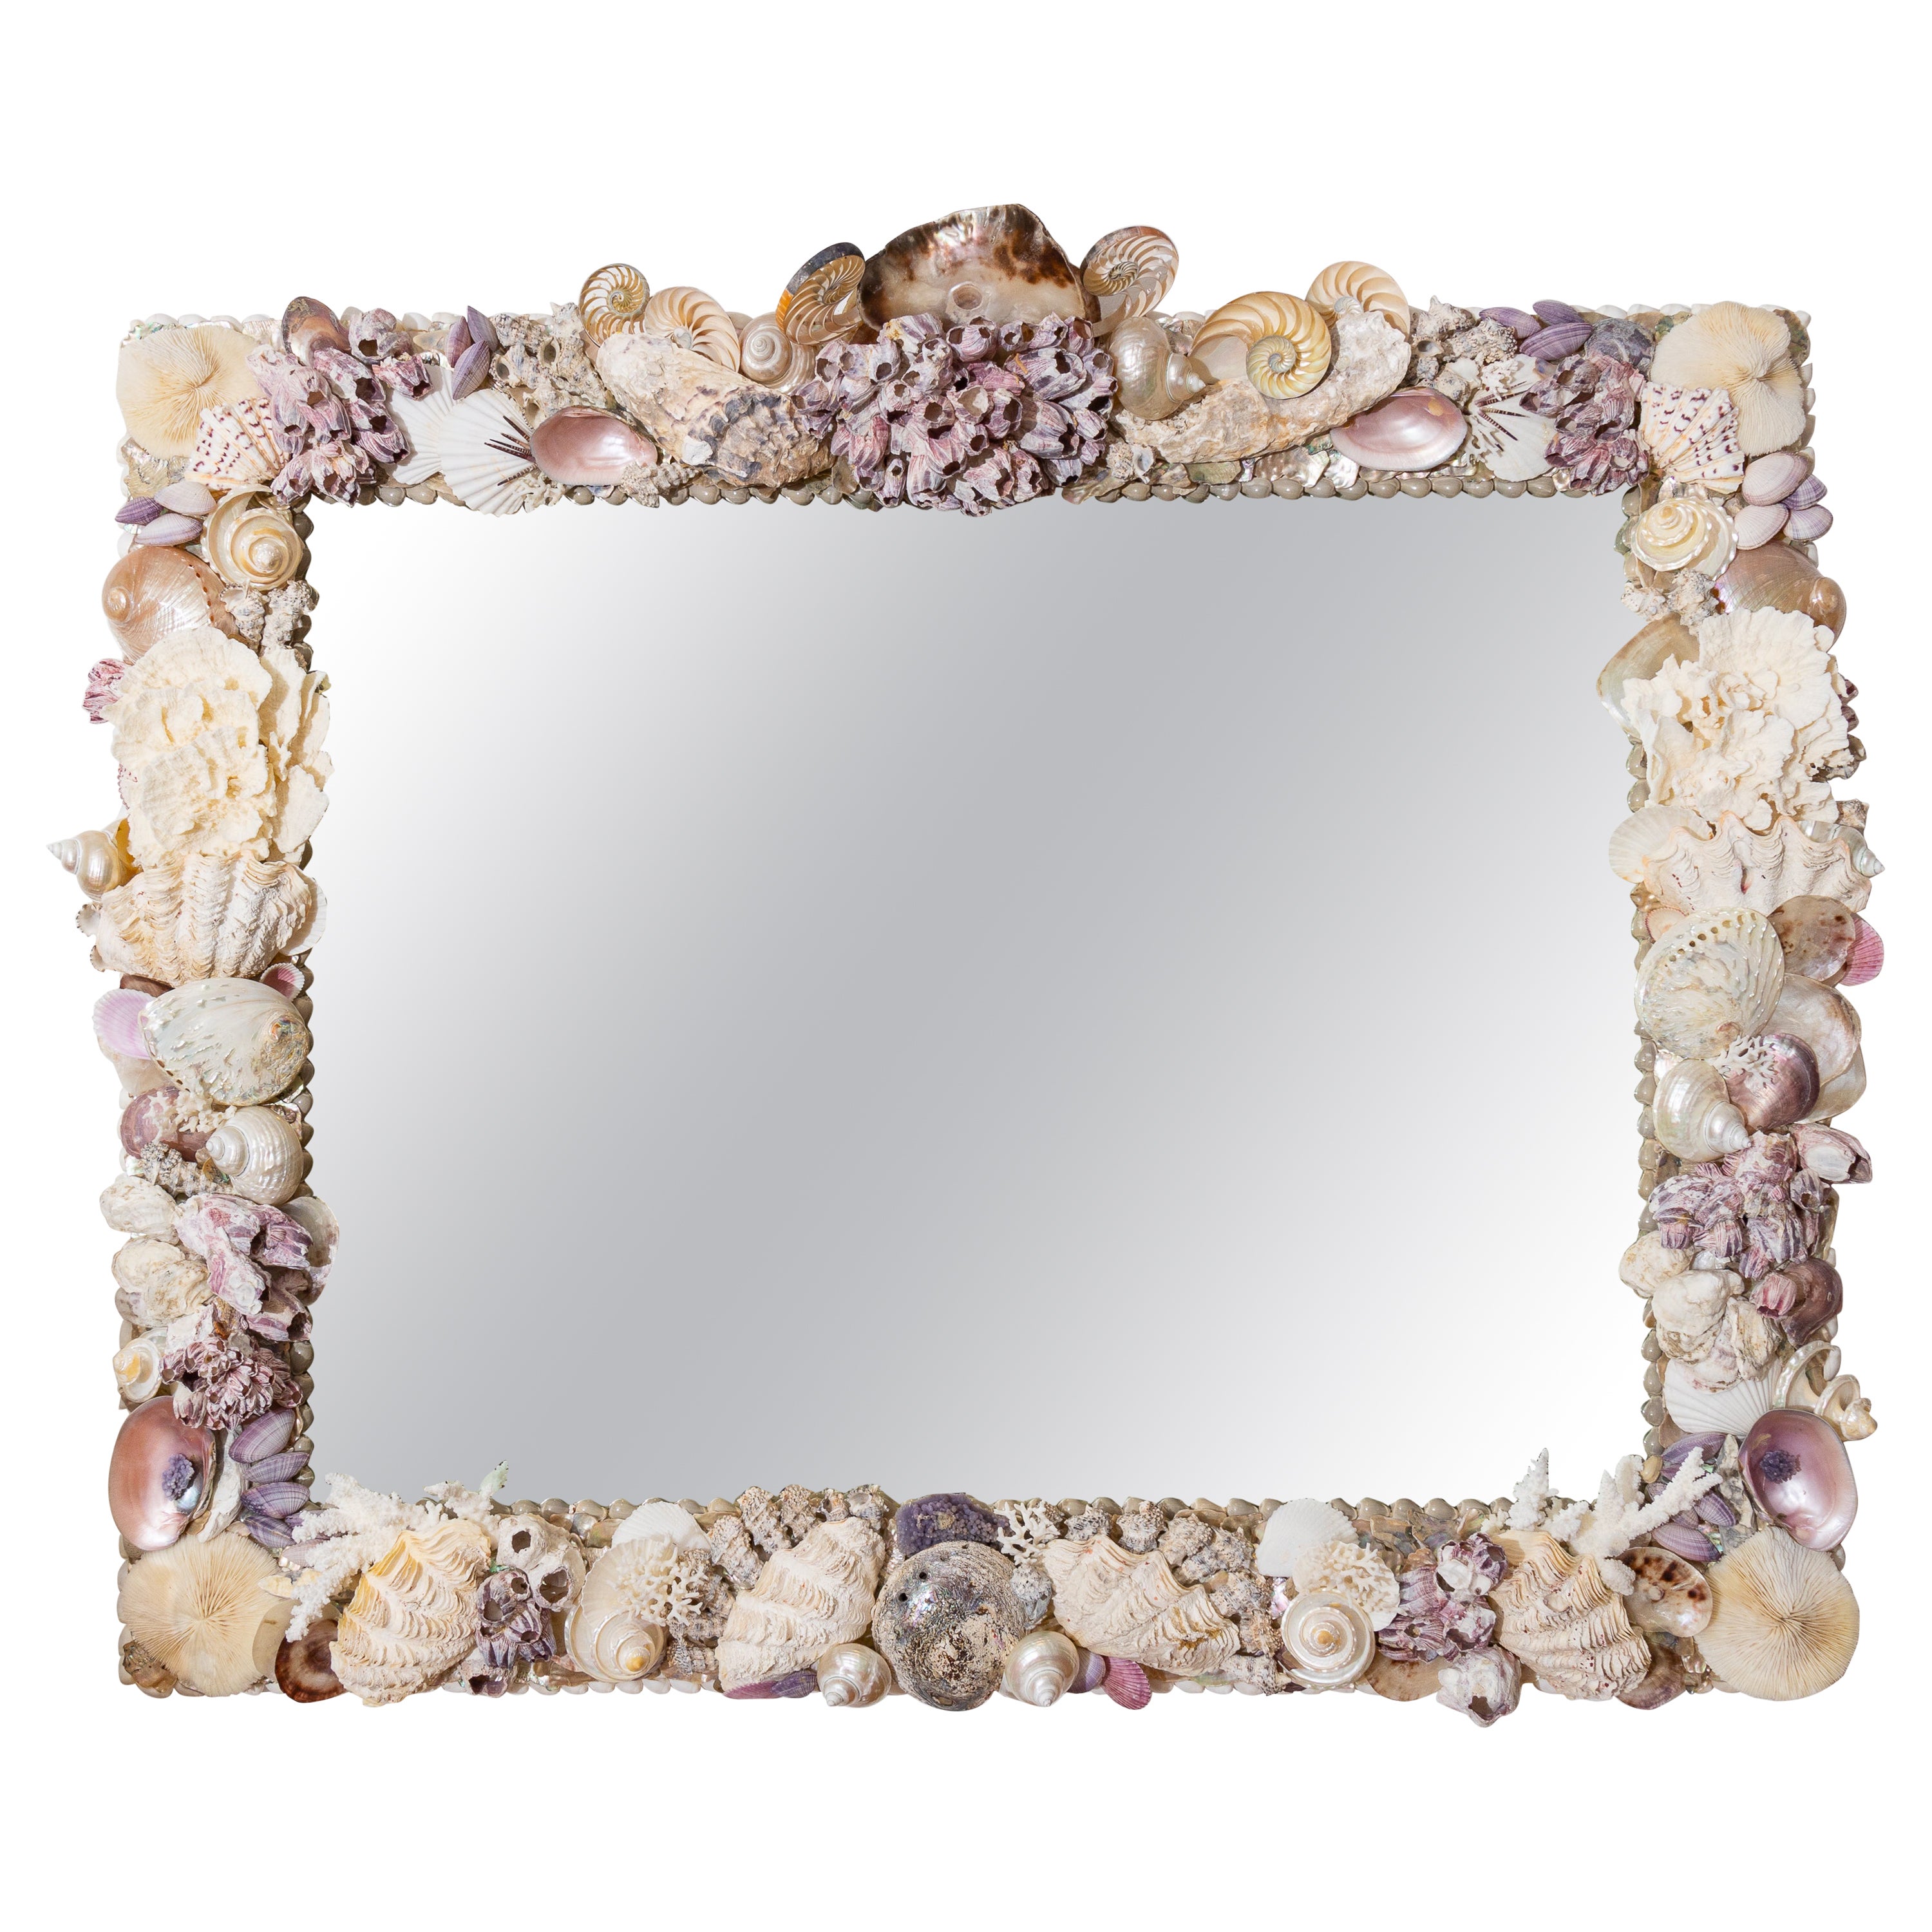 Spectacular Oversized Shell Encrusted Mirror For Sale